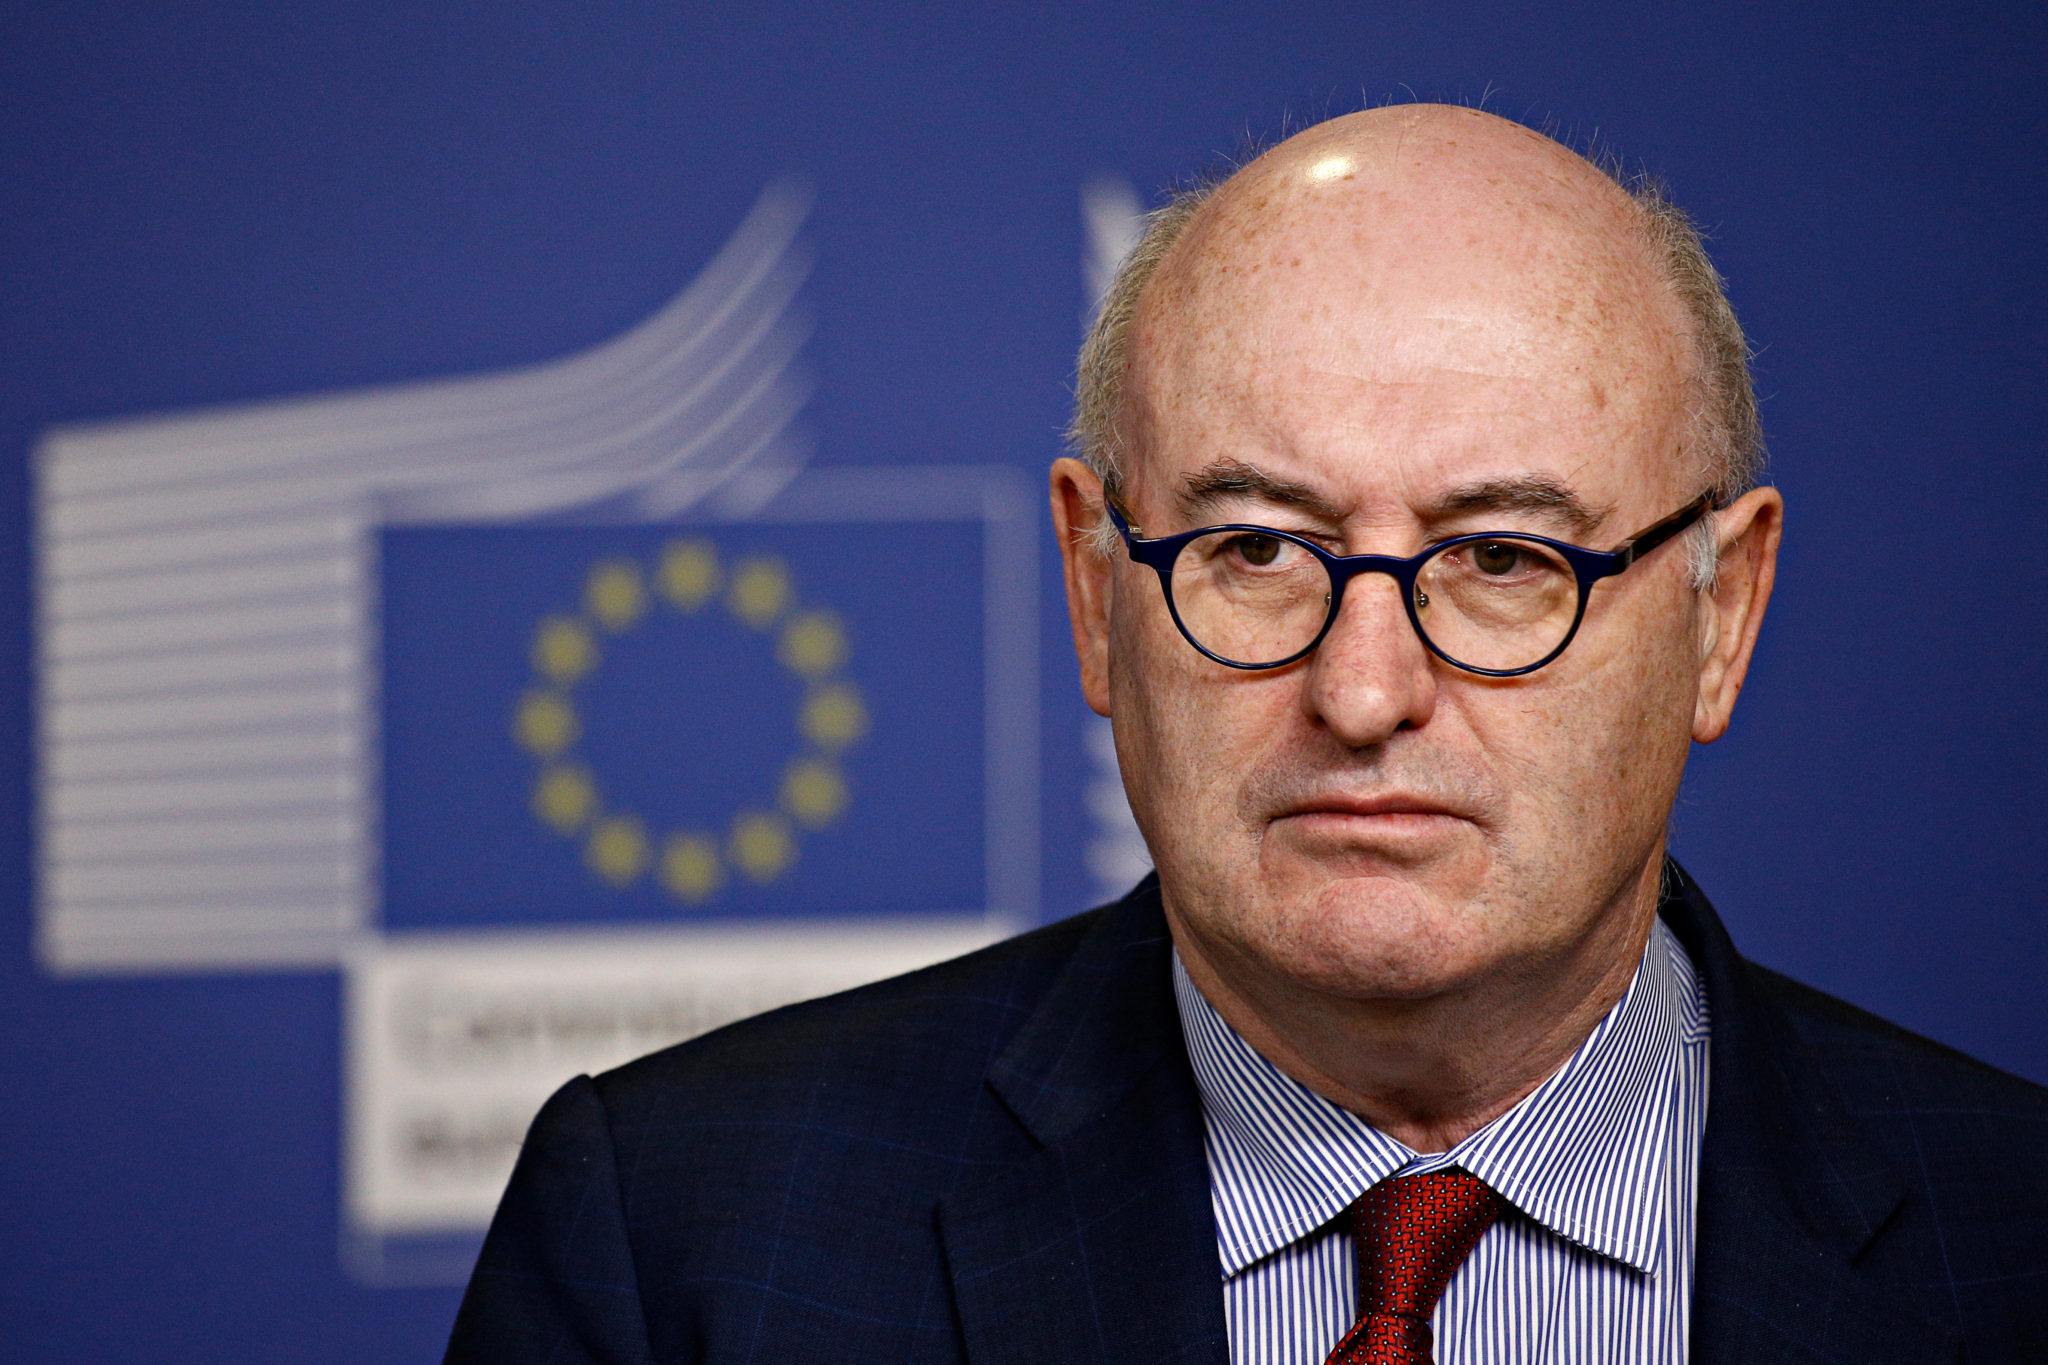 Then-European Commissioner for Agriculture Phil Hogan holds a news conference in Brussels, Belgium in January 2019